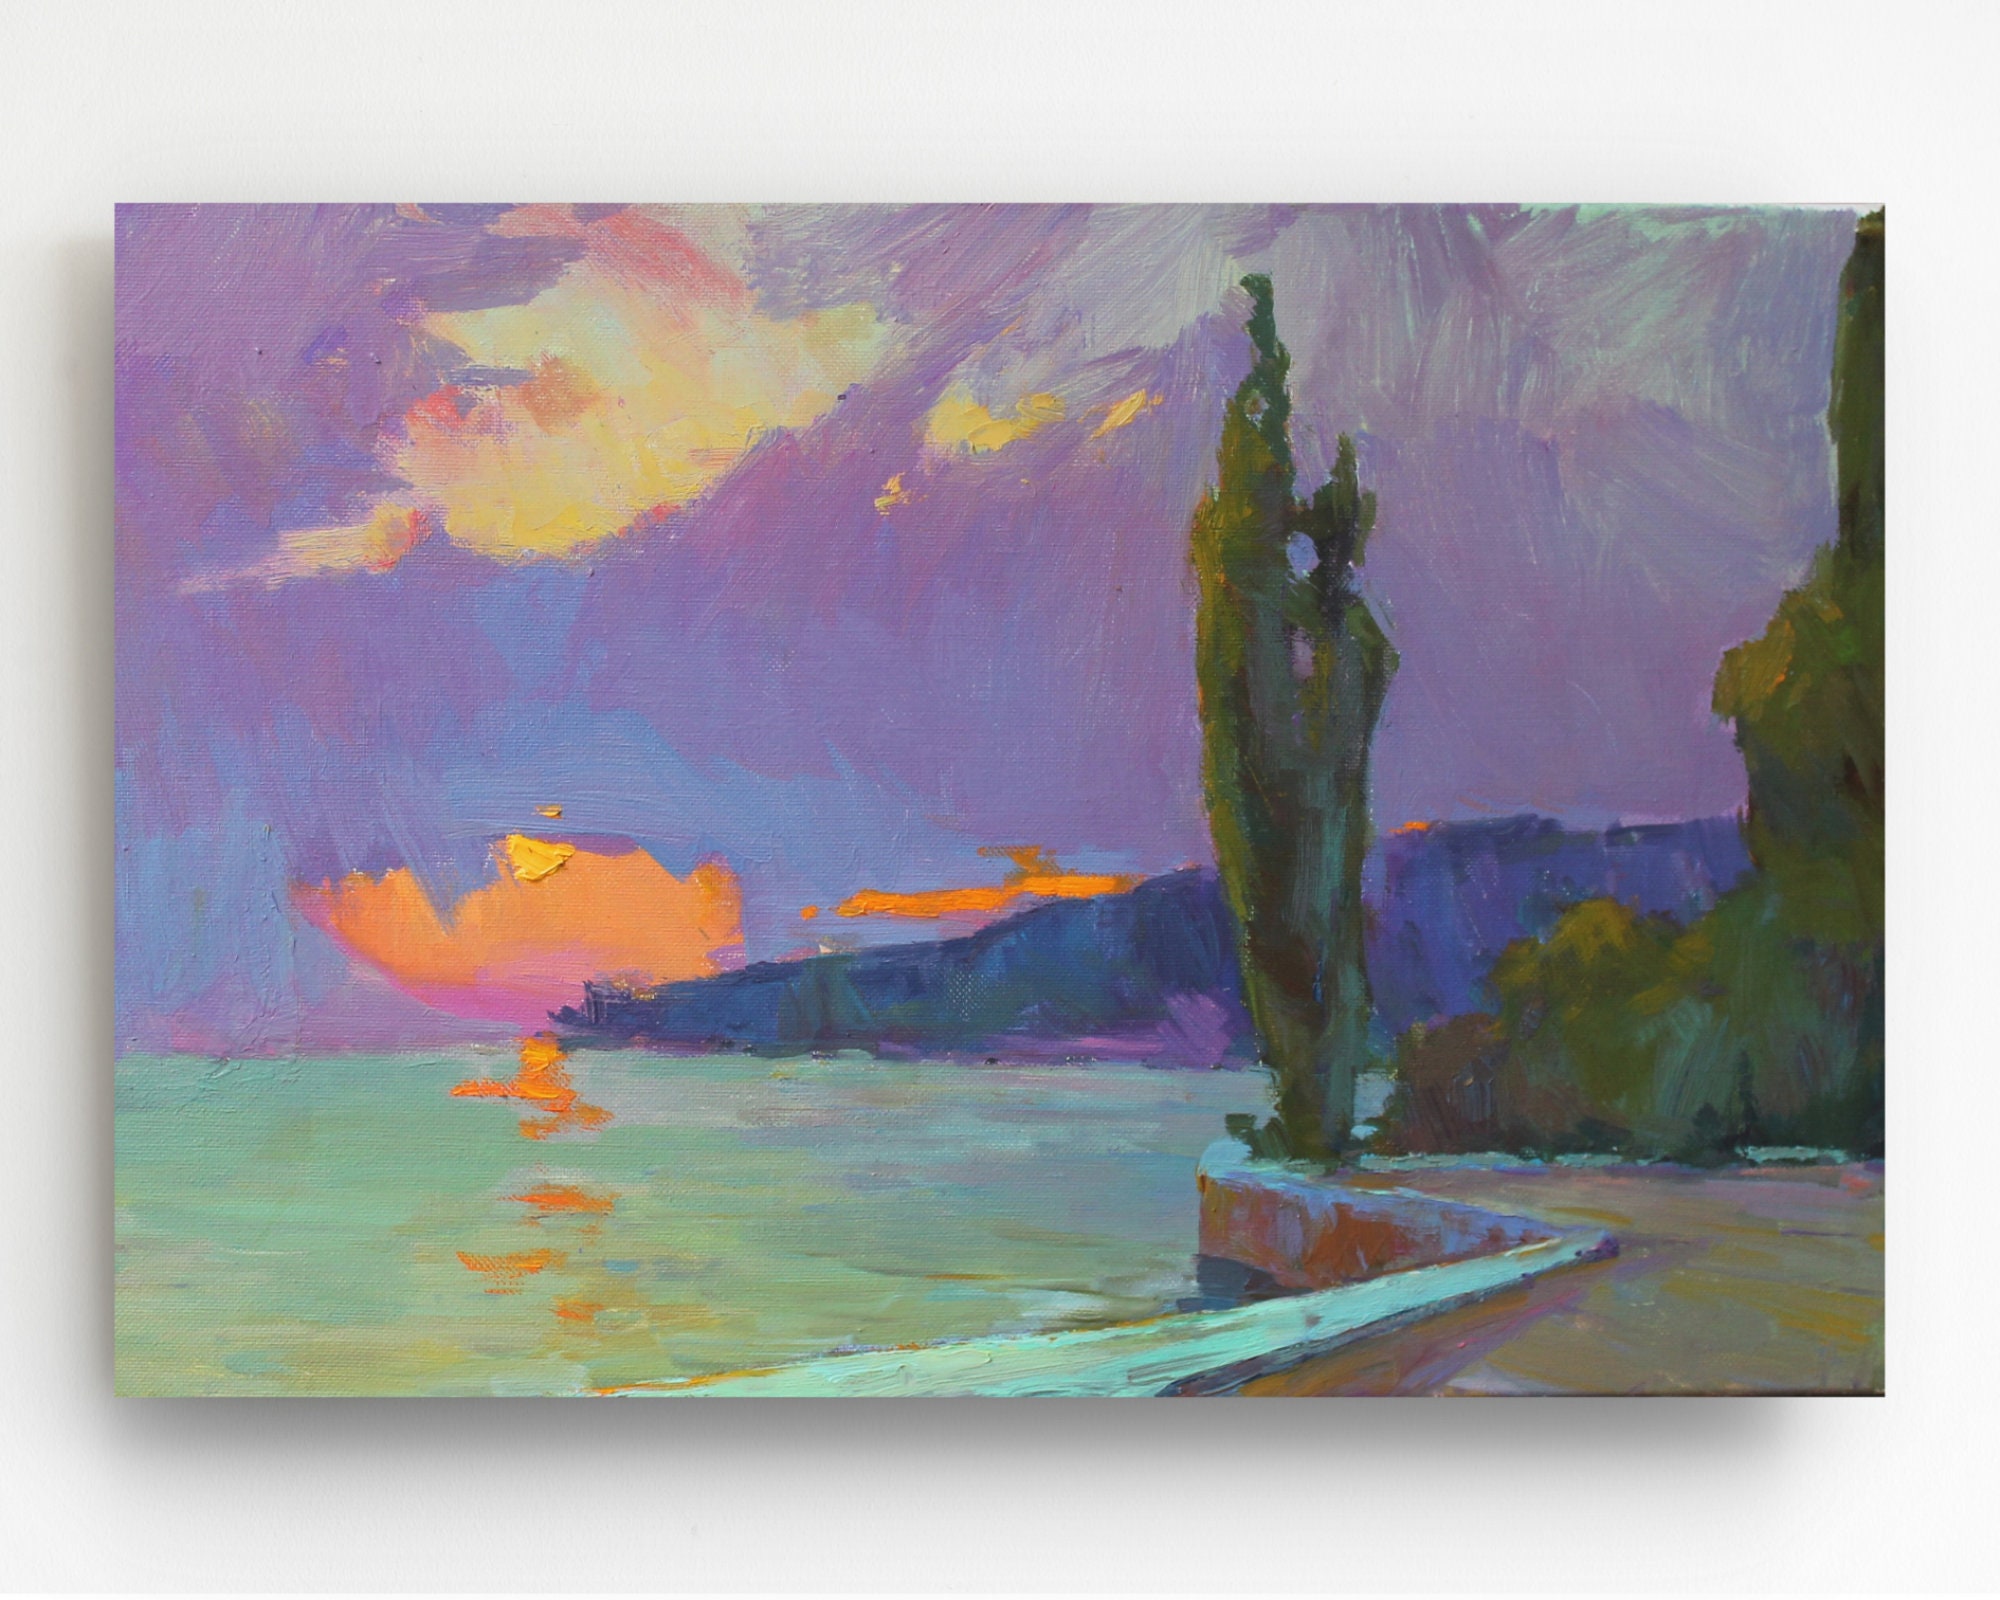 online discount prices Beach Sea sunset Living landscape - .com:  Pictures Original Ocean Nautical Canvas Art Wall Sunset - Art, Wall Modern  Room for Seascape Oil Painting for Living Room Bedroom 